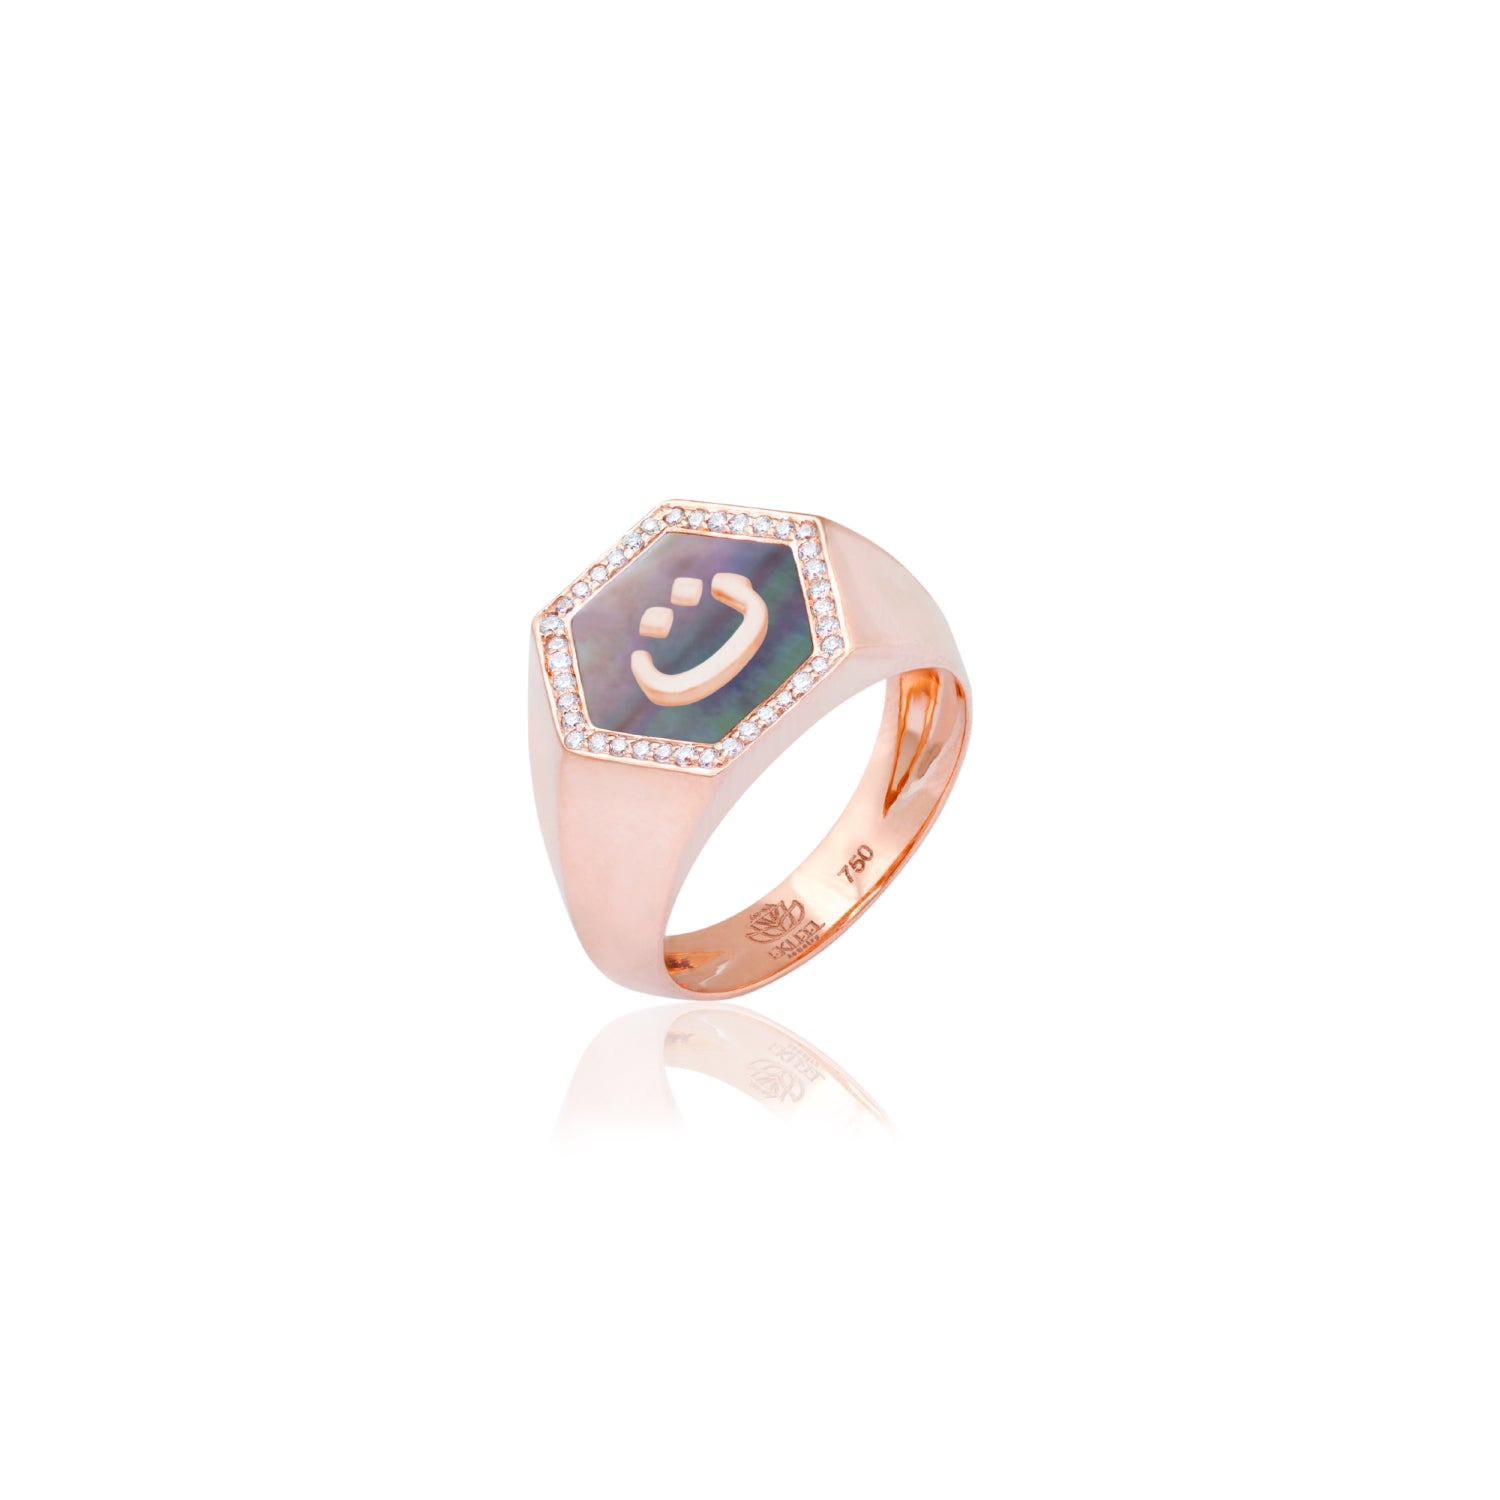 Qamoos 2.0 Letter ت Black Mother of Pearl and Diamond Signet Ring in Rose Gold